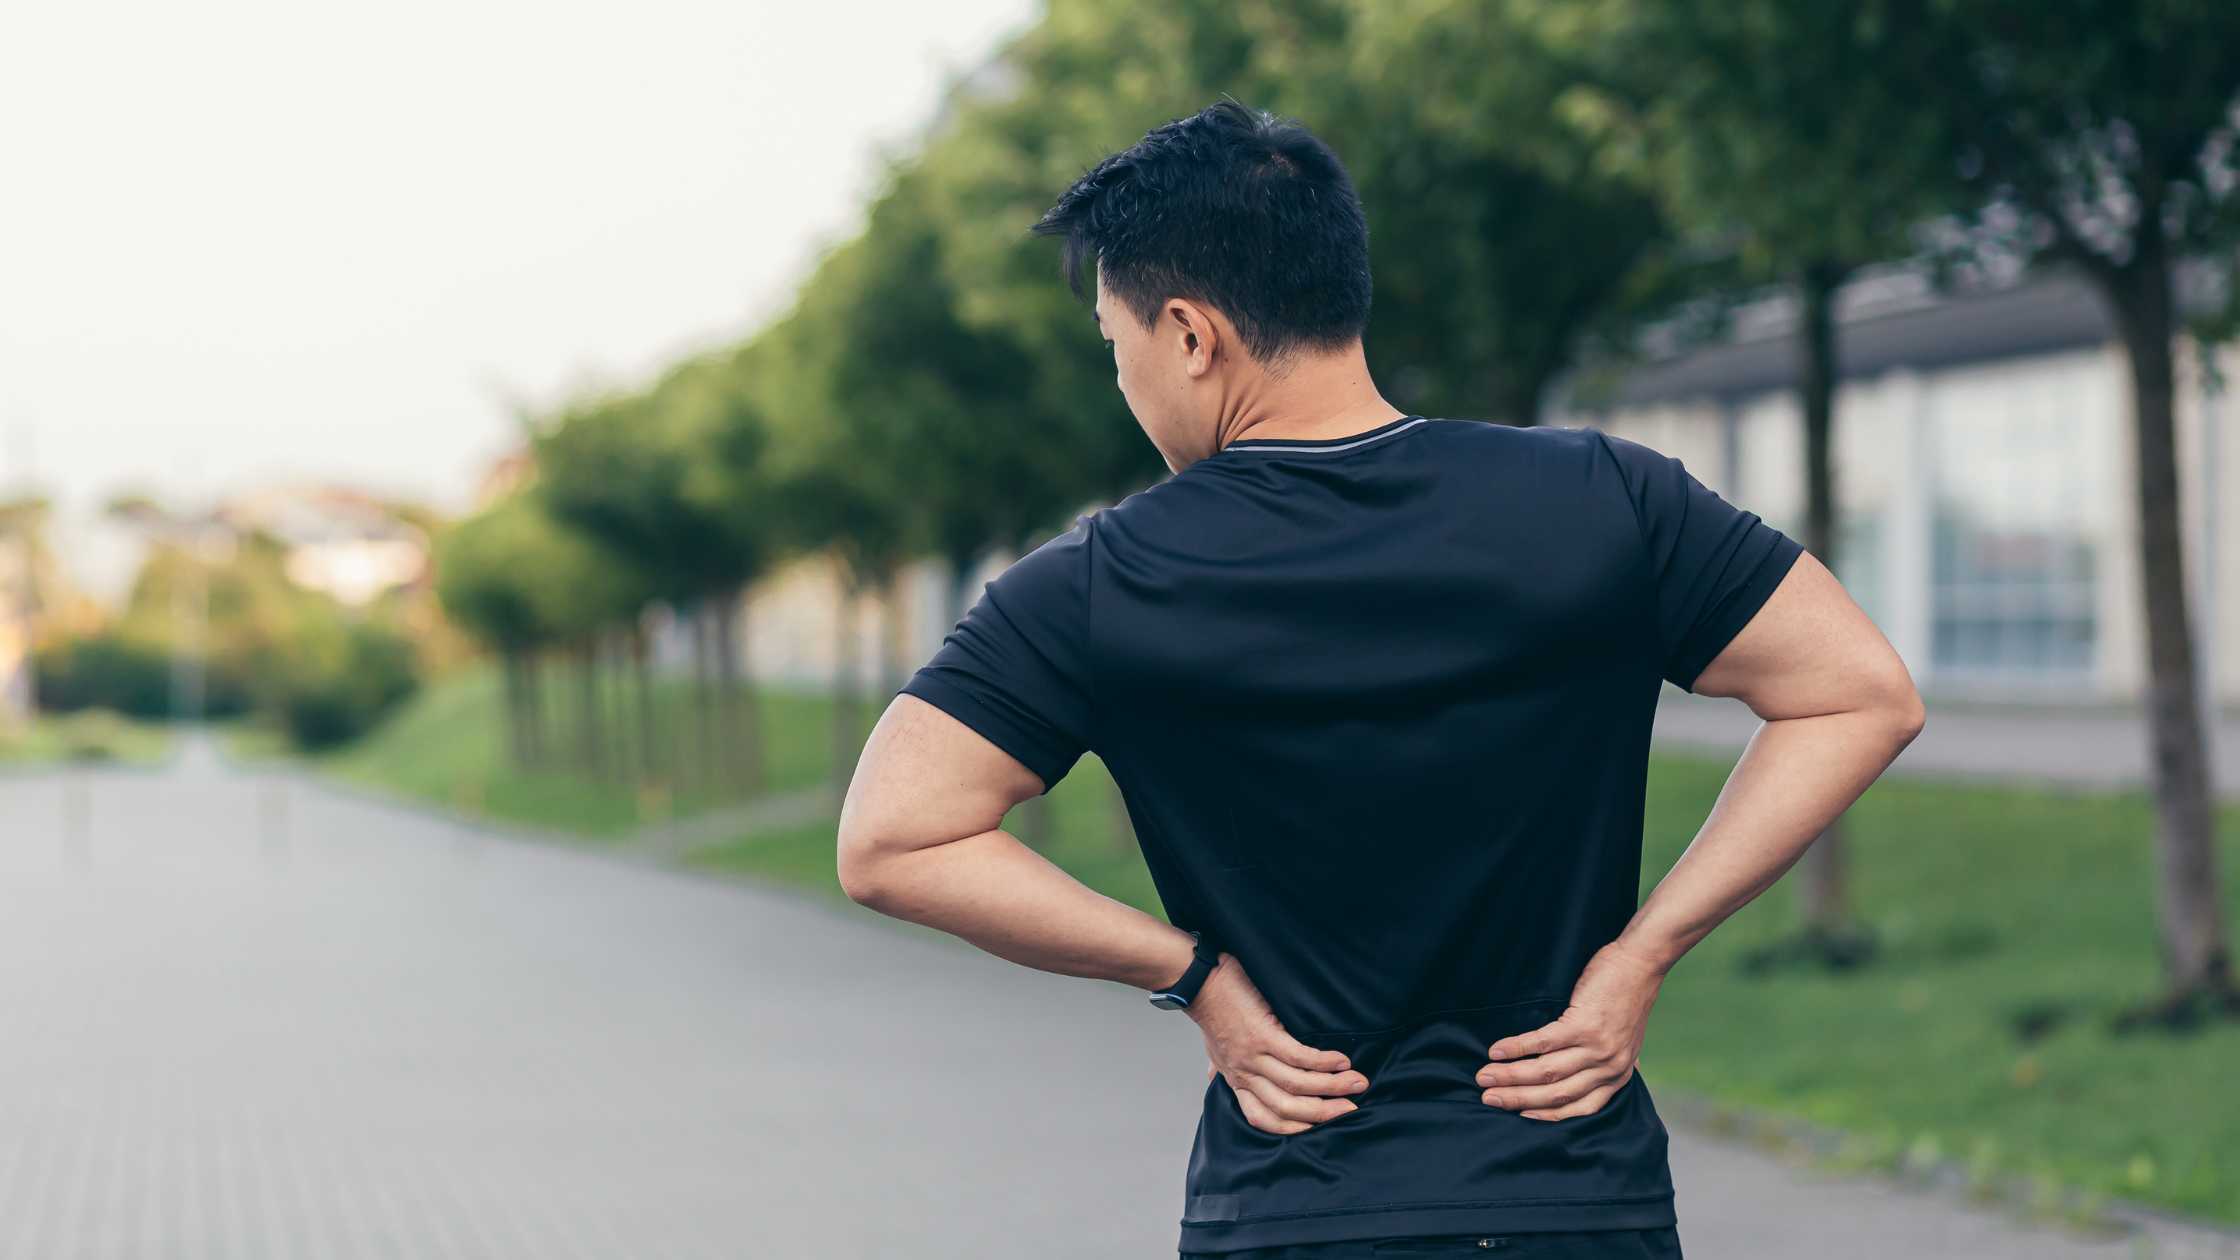 The Ultimate Self Rehab Guide for Low Back Pain